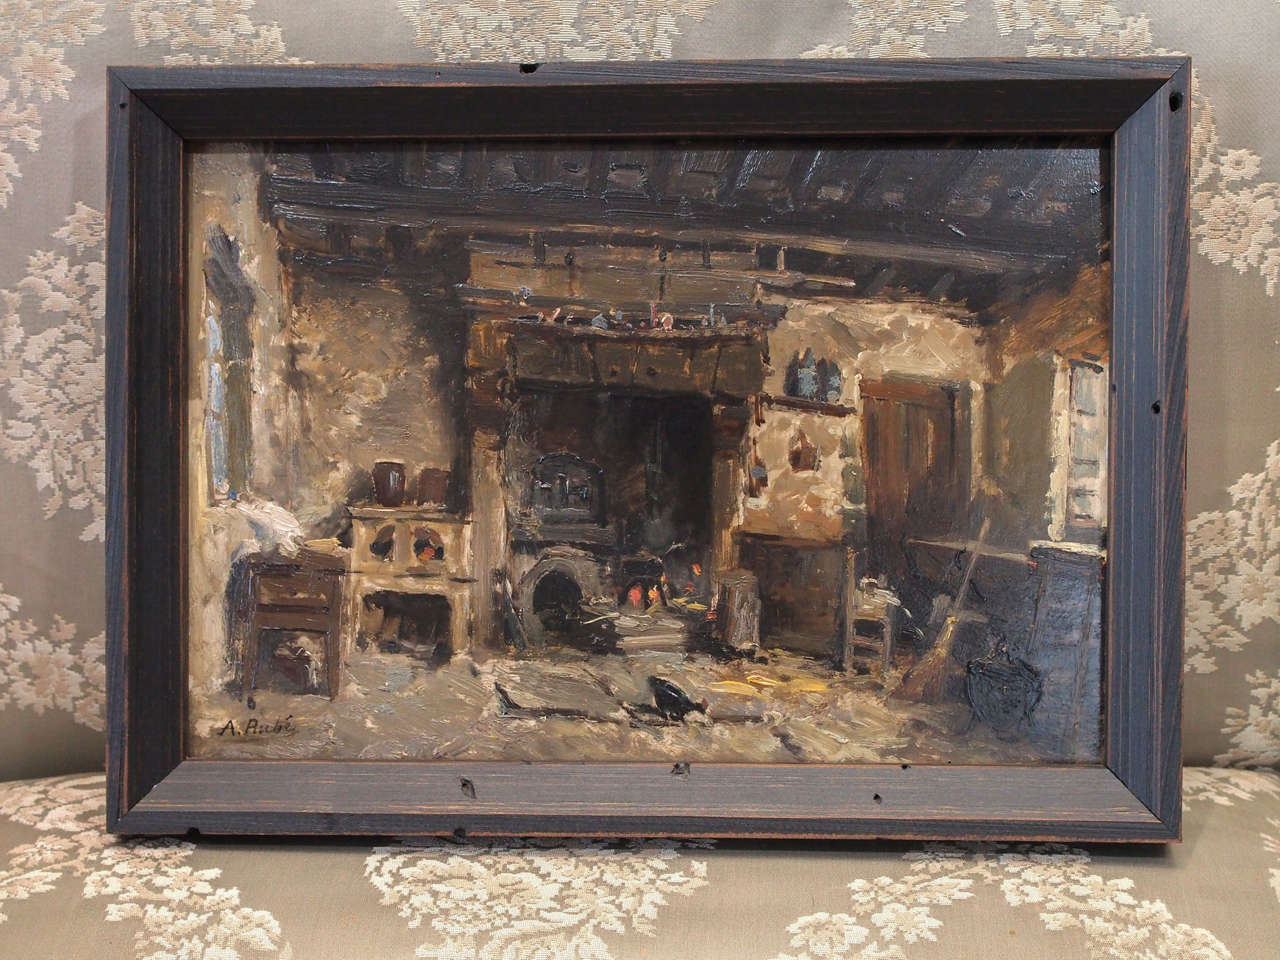 A painting in oil on board of a rustic kitchen interior by A.Rube 1815-1899
signed in lower left corner.